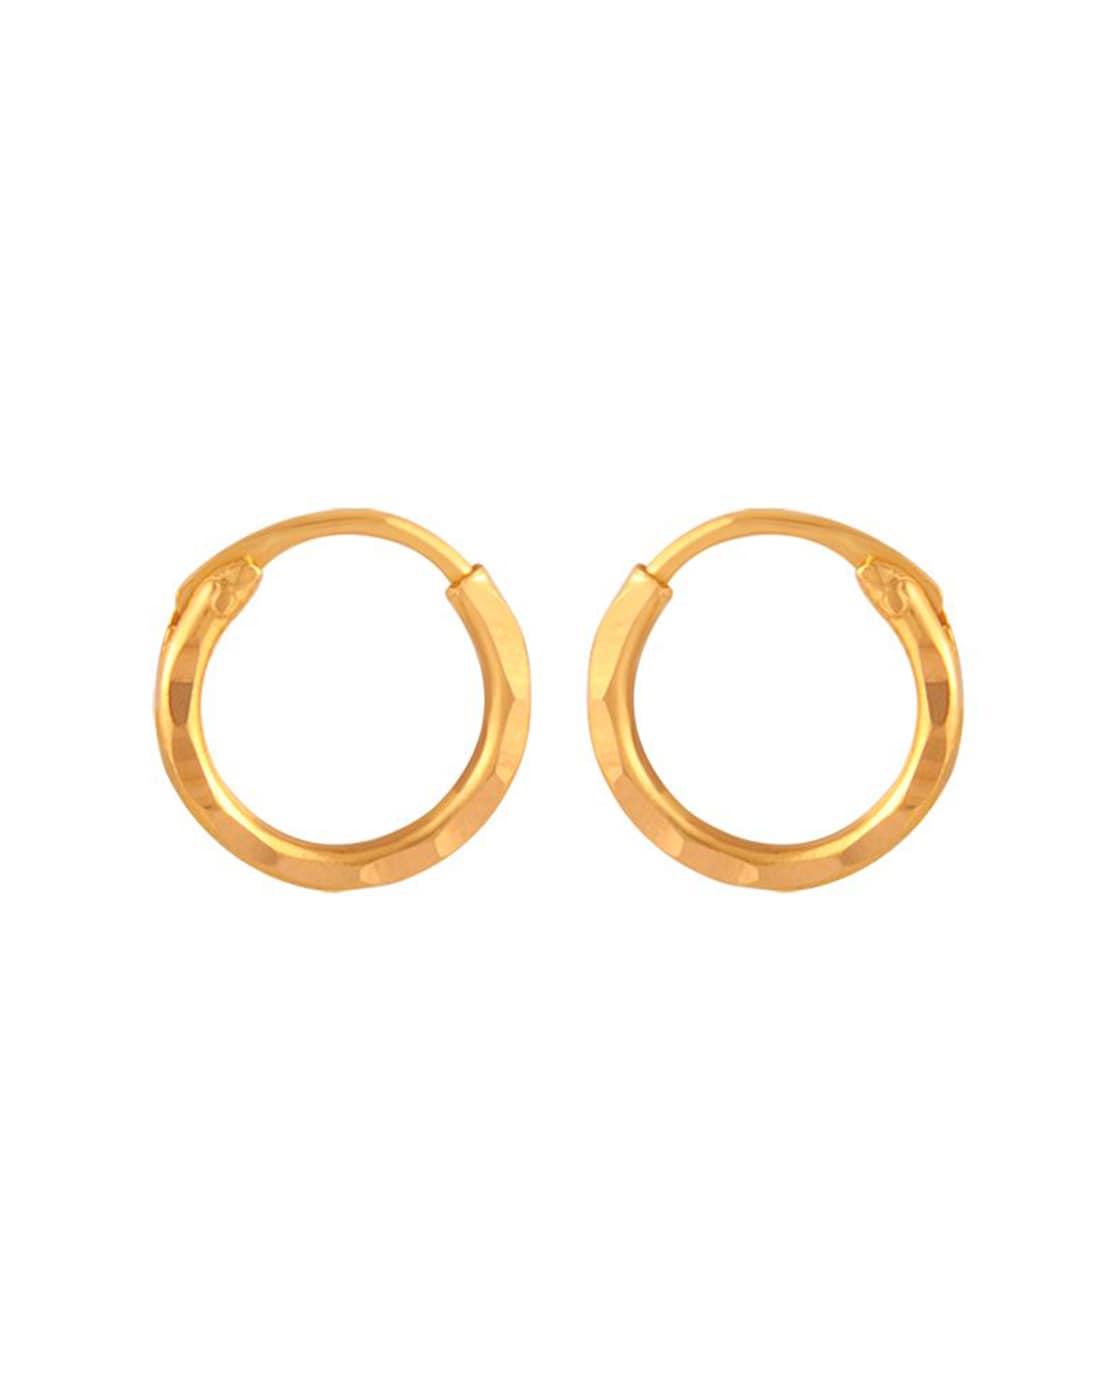 Buy Beautiful Gold Plated Hoop Earrings Large Size for Women